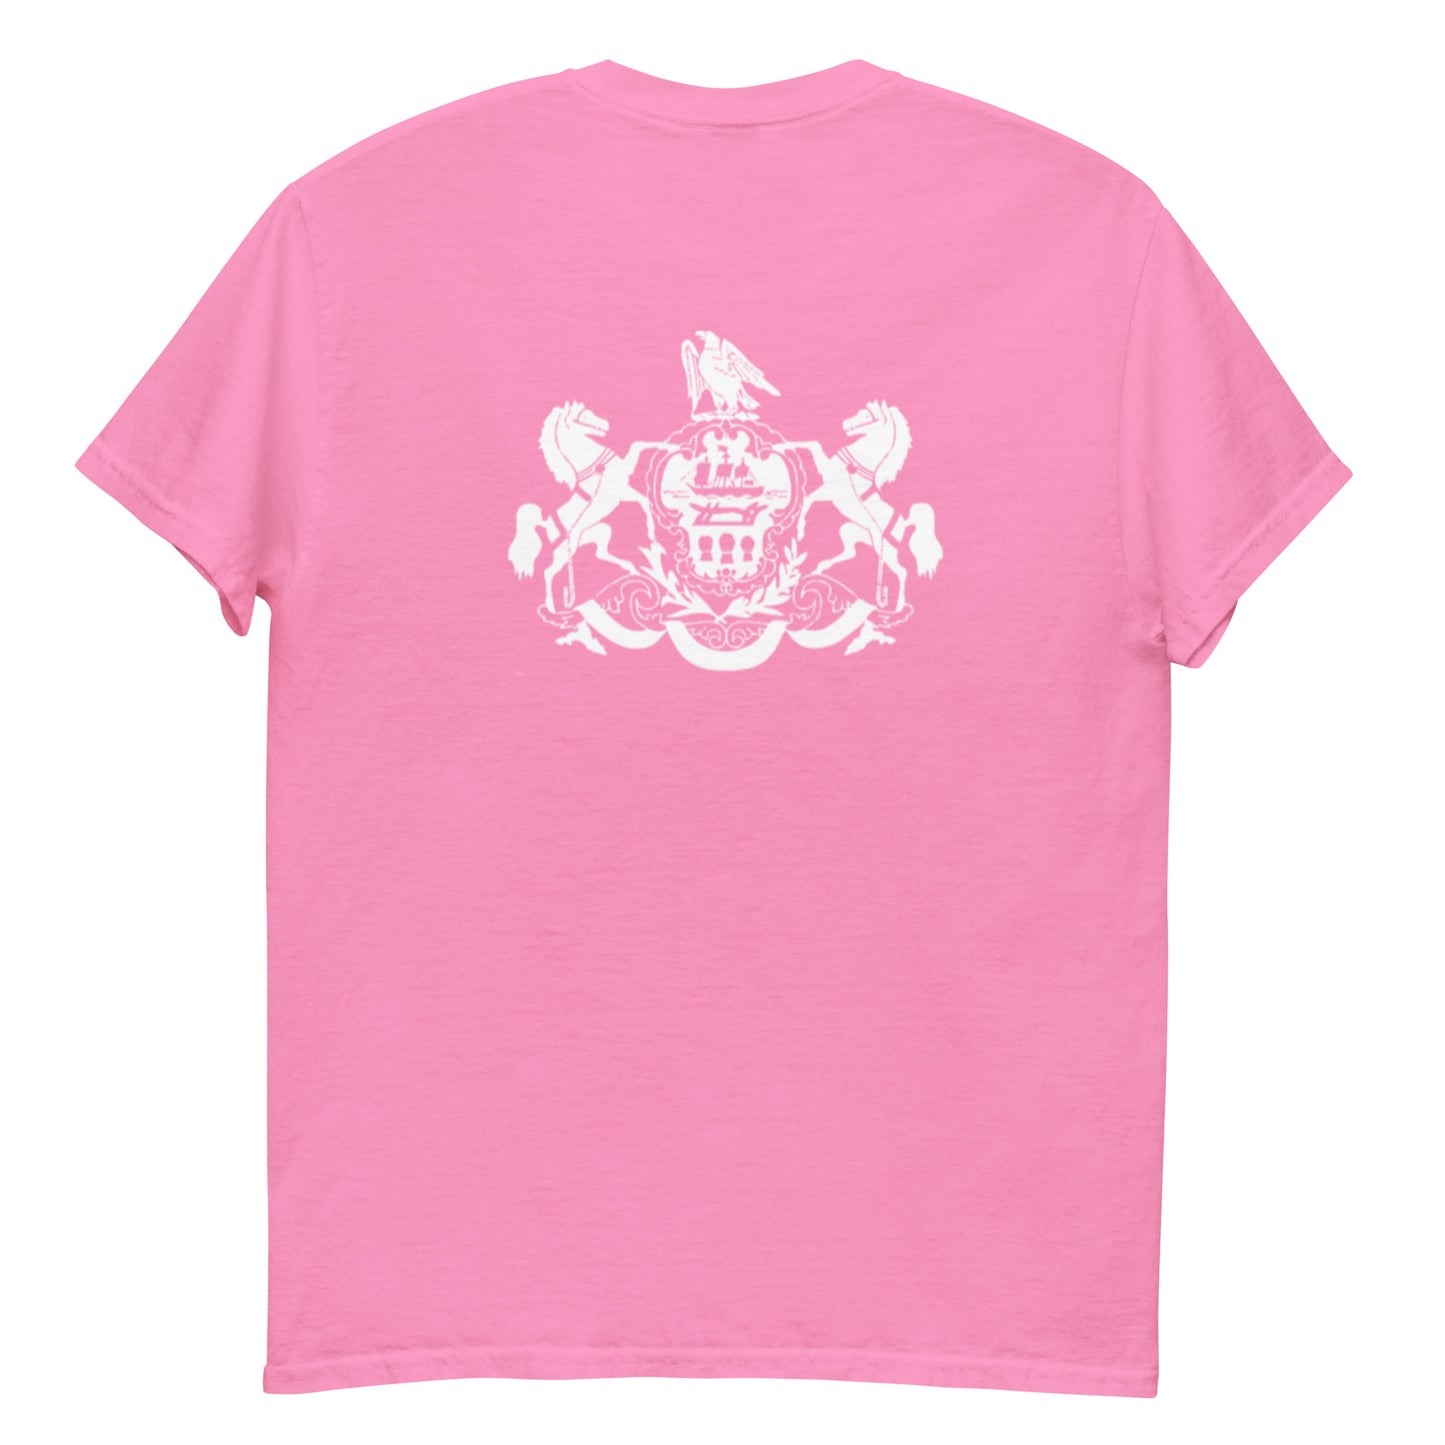 Erie All American - Back Crest Unisex Tee